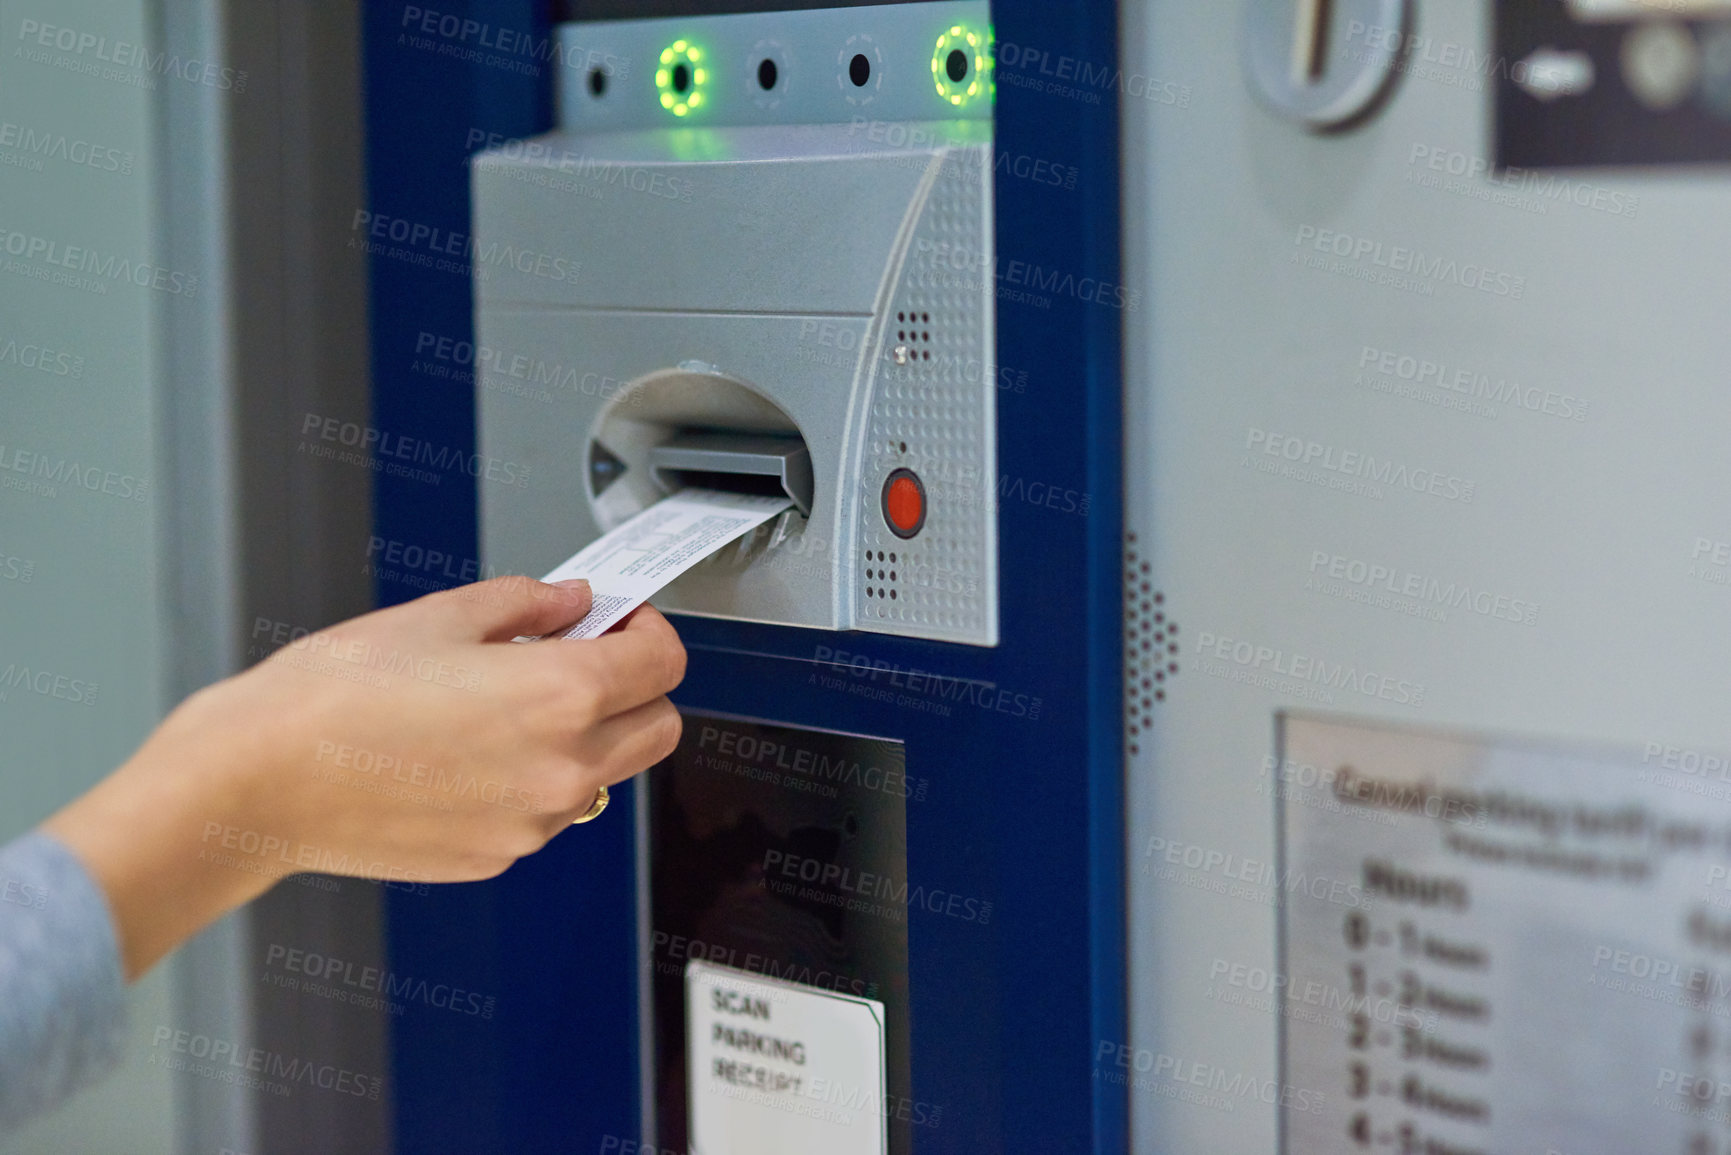 Buy stock photo Cropped shot of an unrecognizable person inserting a ticket into a meter